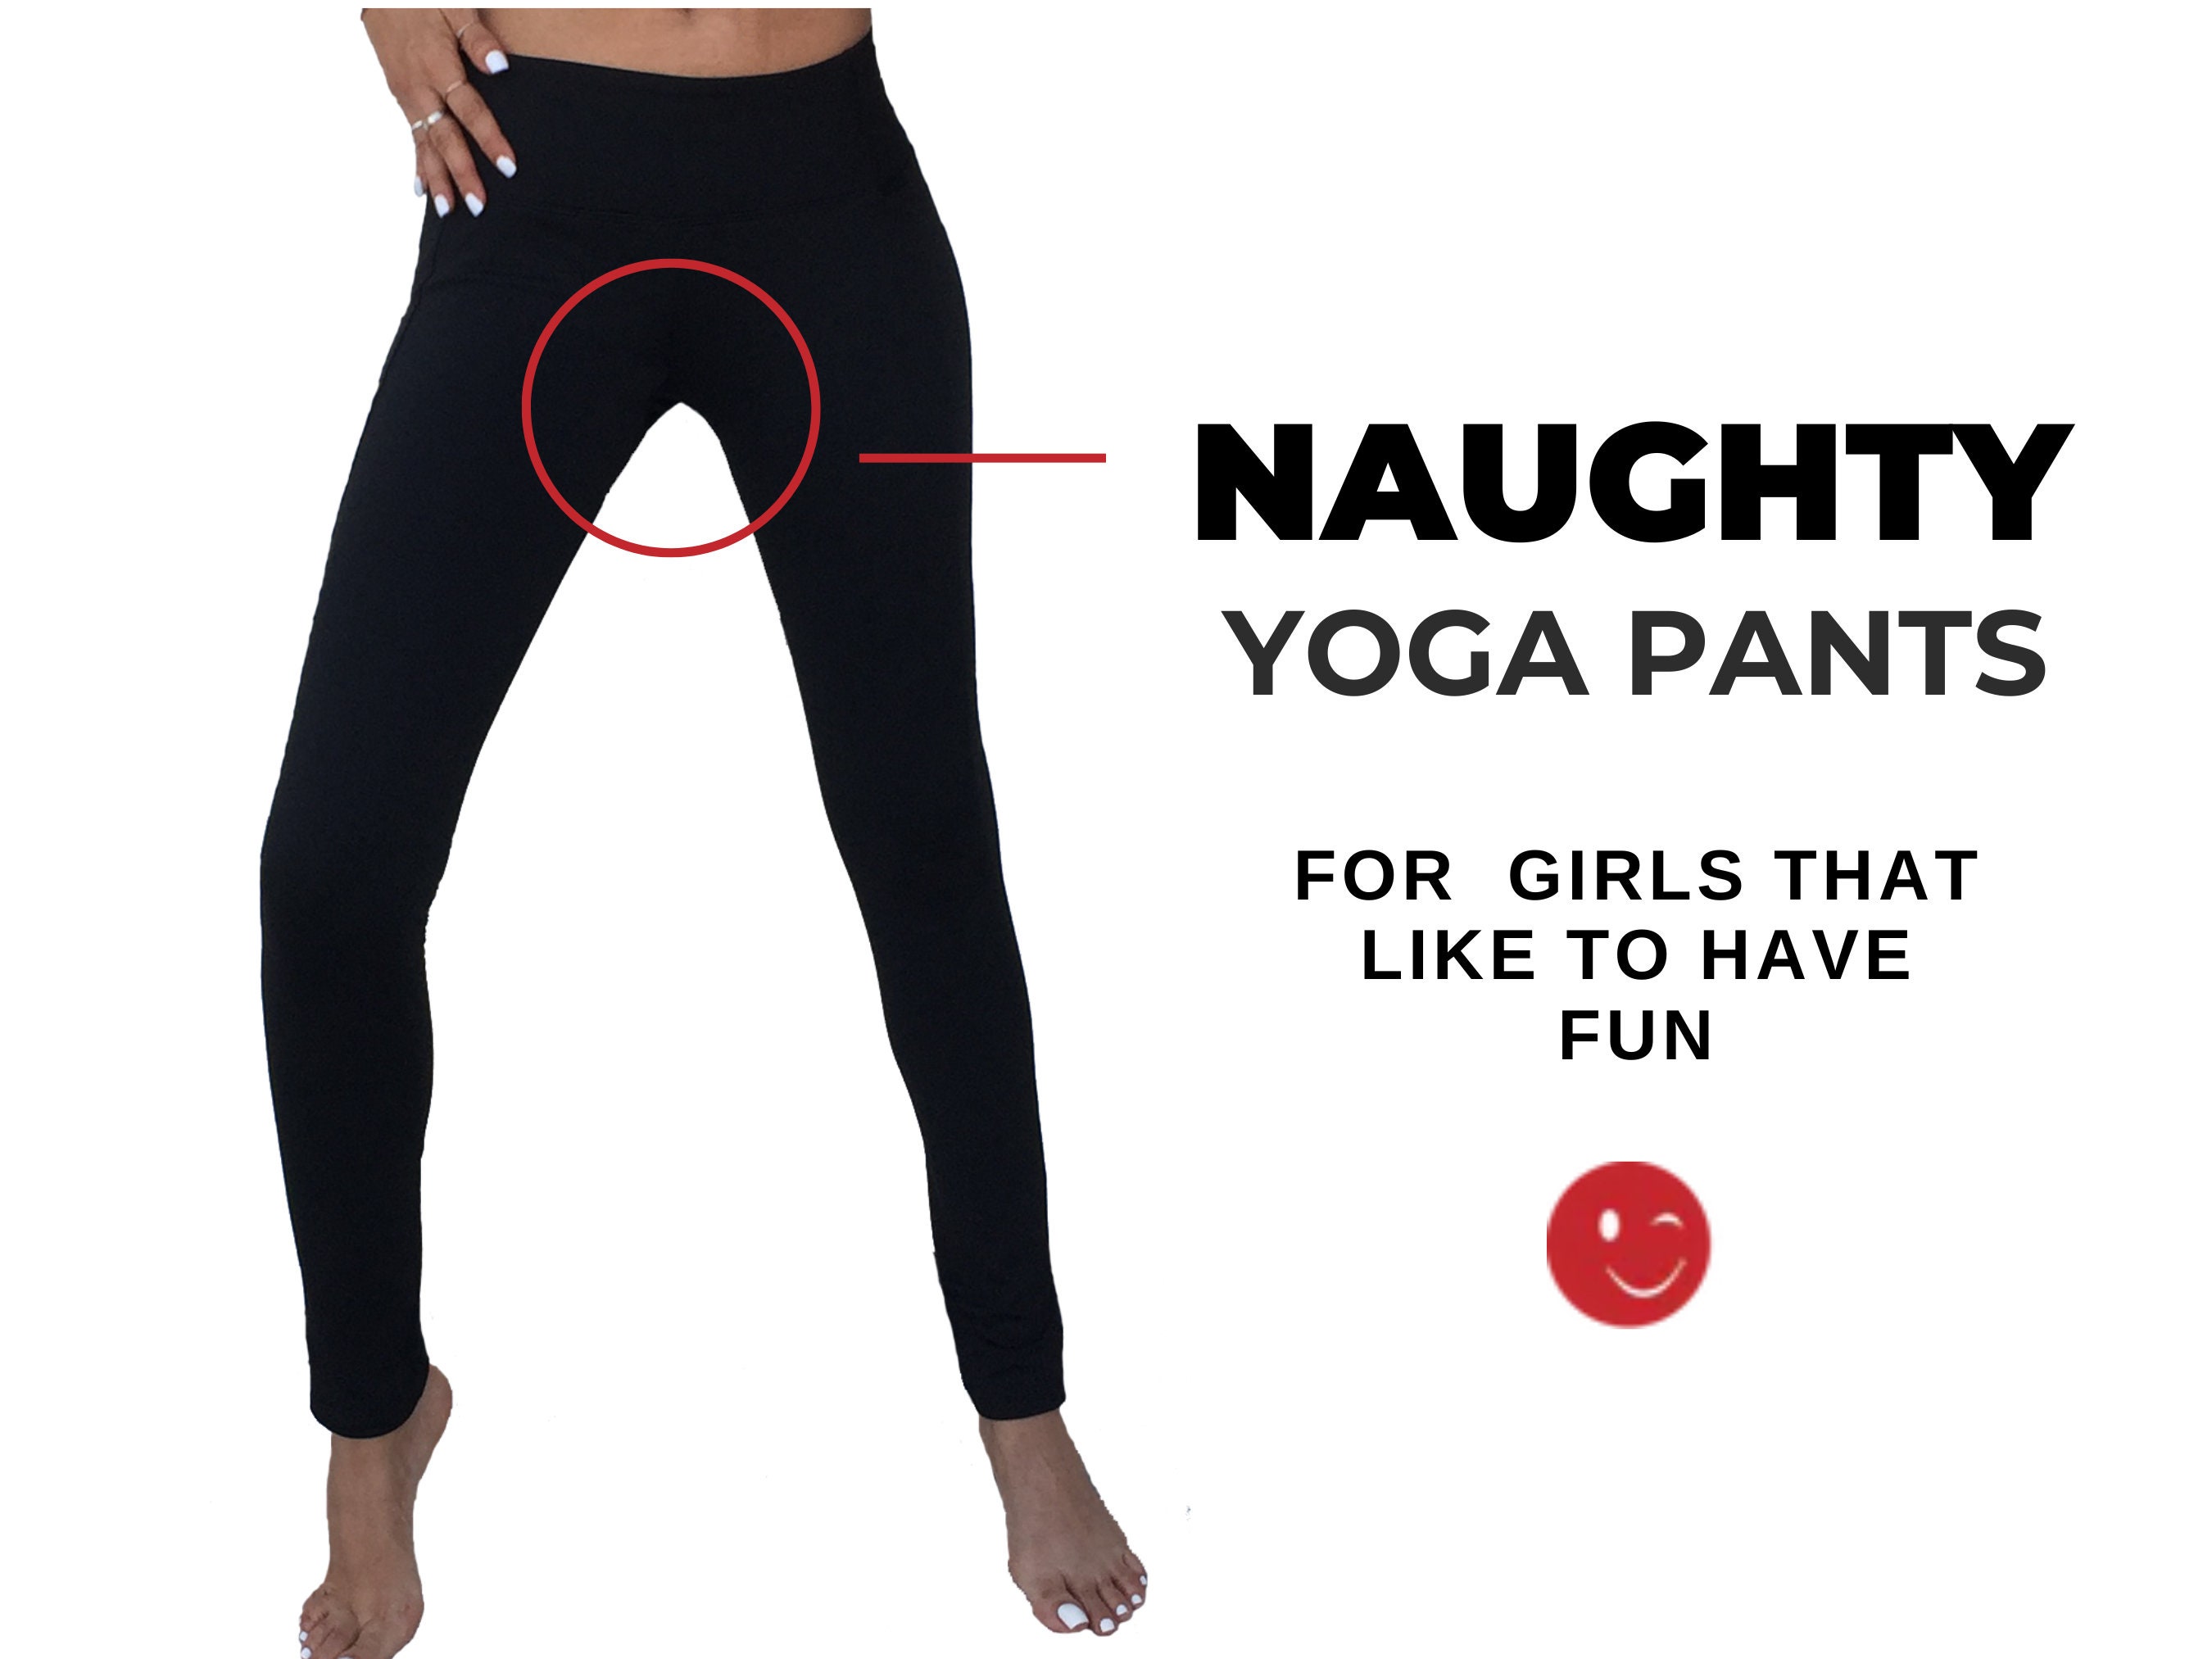 Srirachas Yoga Pant, Flattering and Crotchless, Fun and Sexy Leggings,  Naughty Gift, Hot Adult Date Clothing, Better Than Lingerie, Romantic 